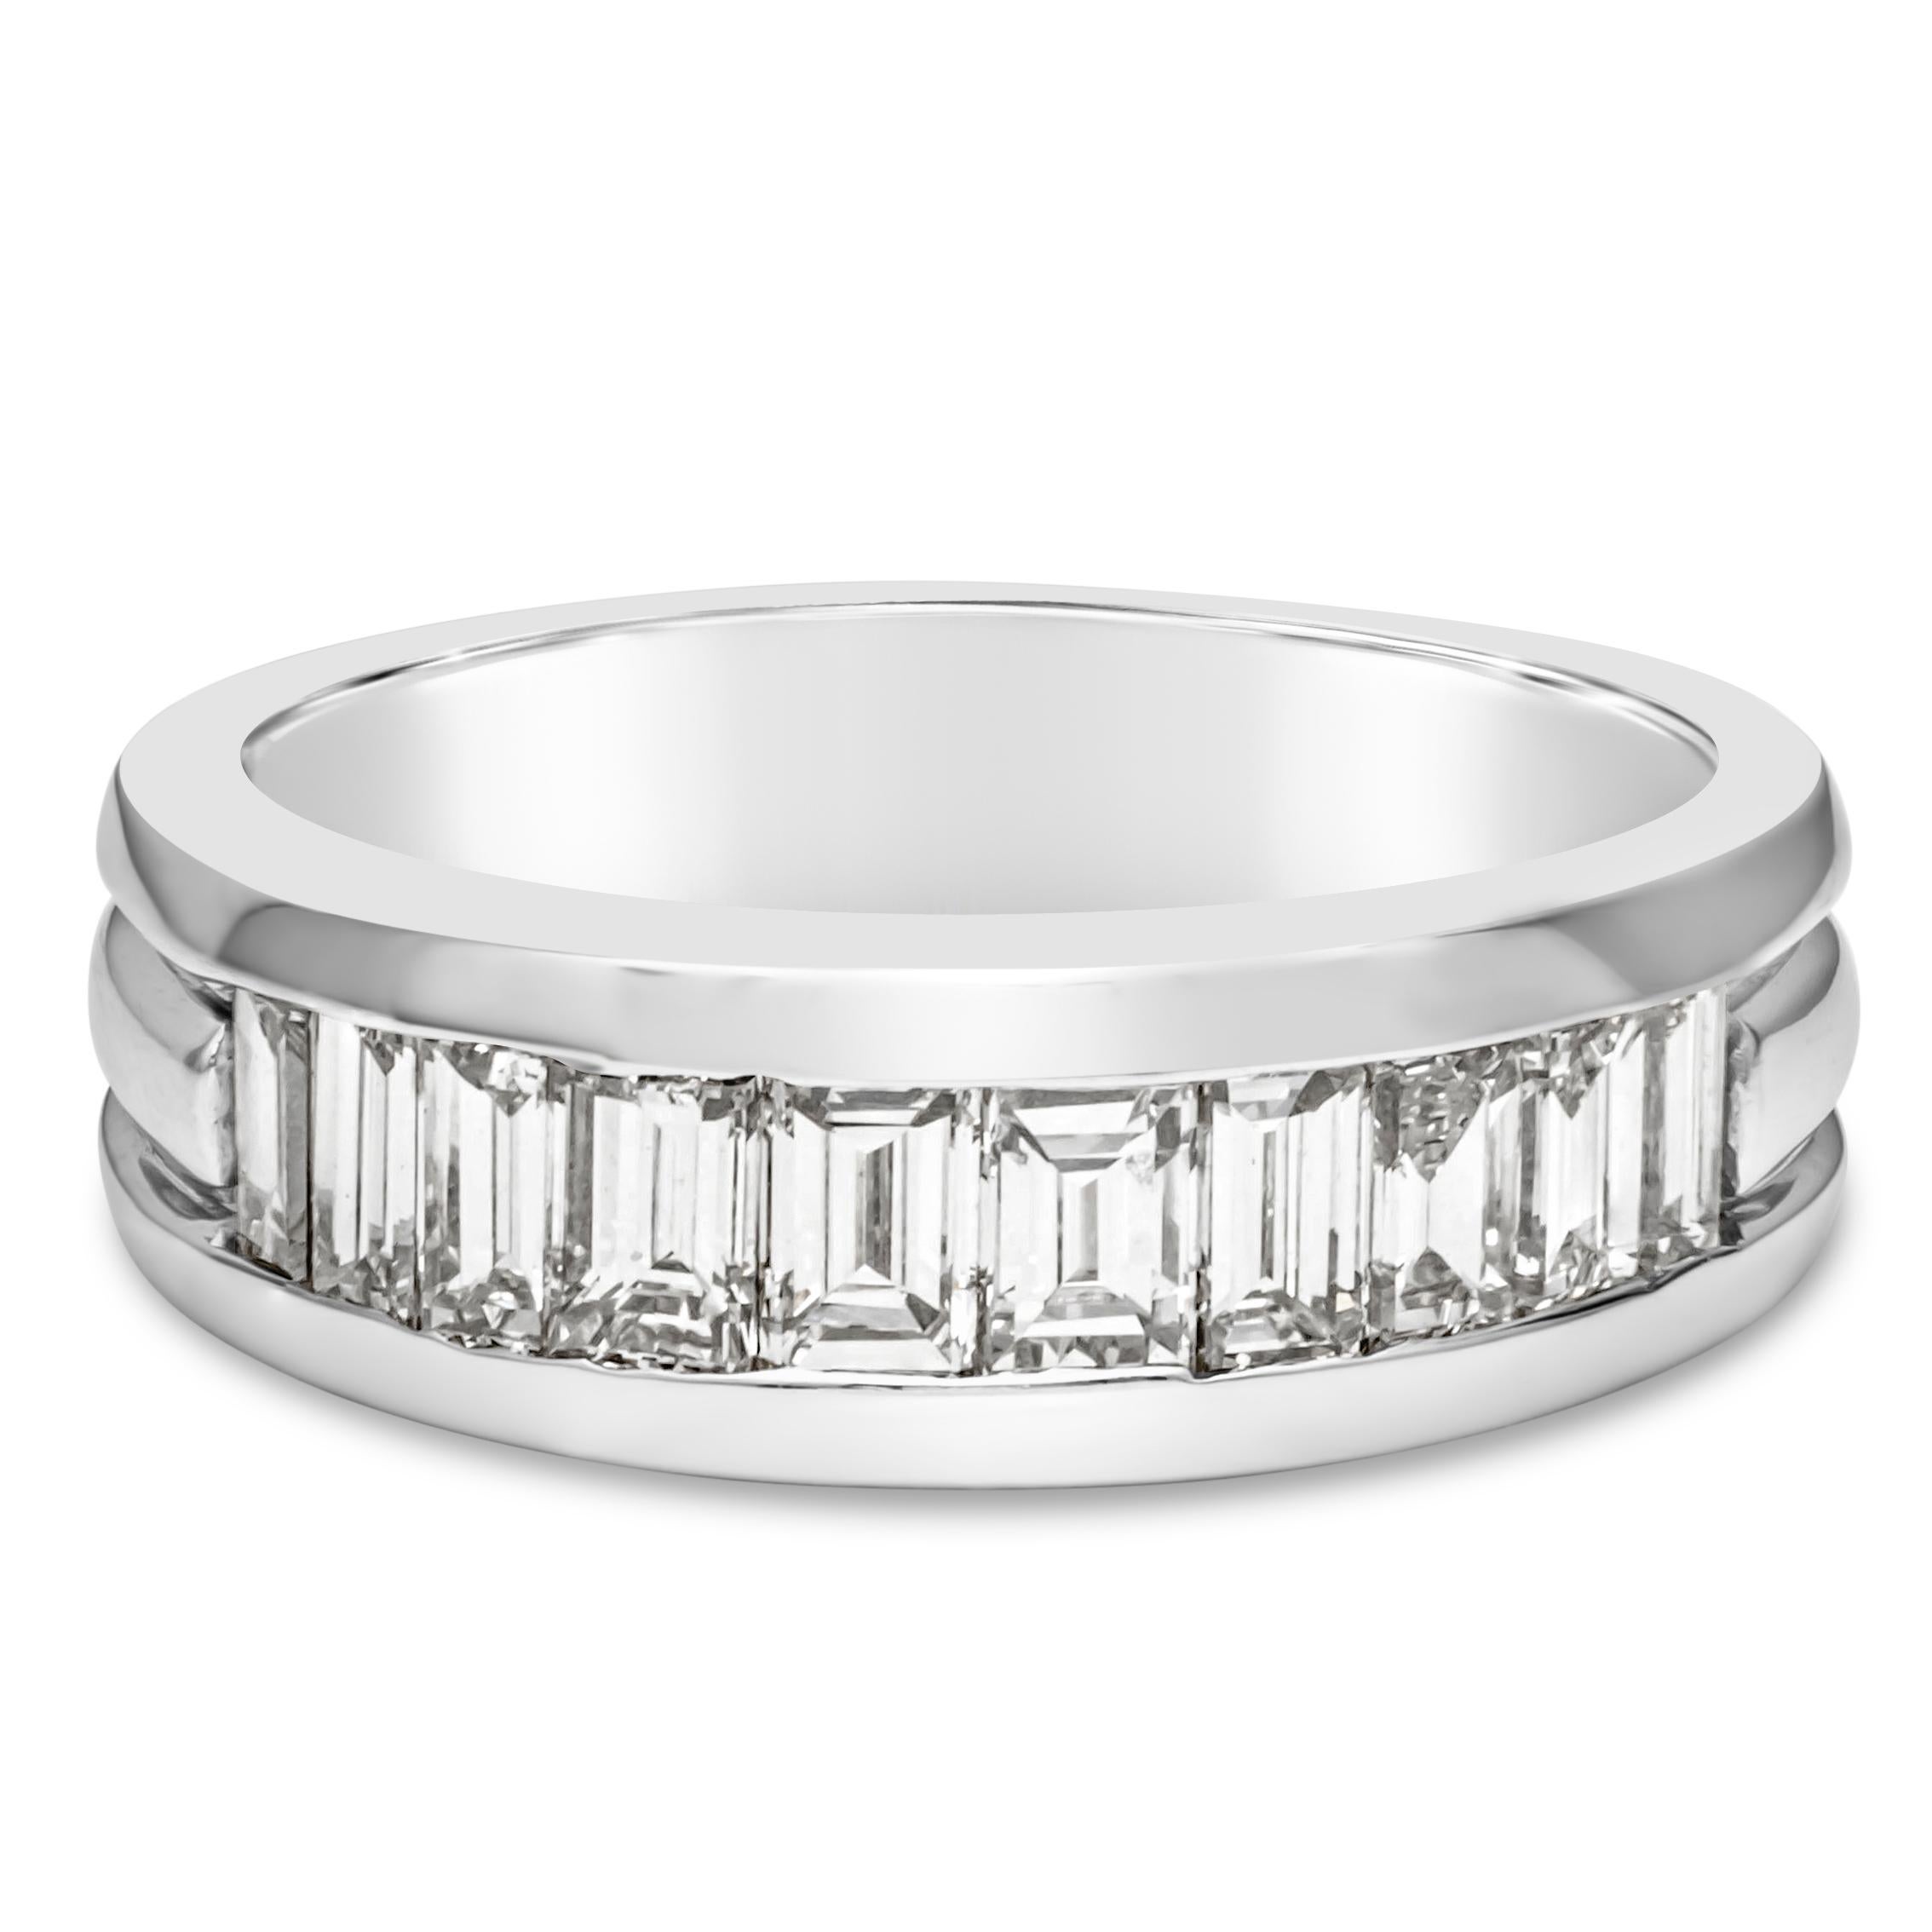 A subtle yet distinctive men's wide wedding band, showcasing 10 baguette cut diamonds weighing 2.50 carats total, mounted in a half-way channel setting. Finely made in 18K white gold, 8.09 mm in width. Size 11.5 US, resizable upon request. 

Roman